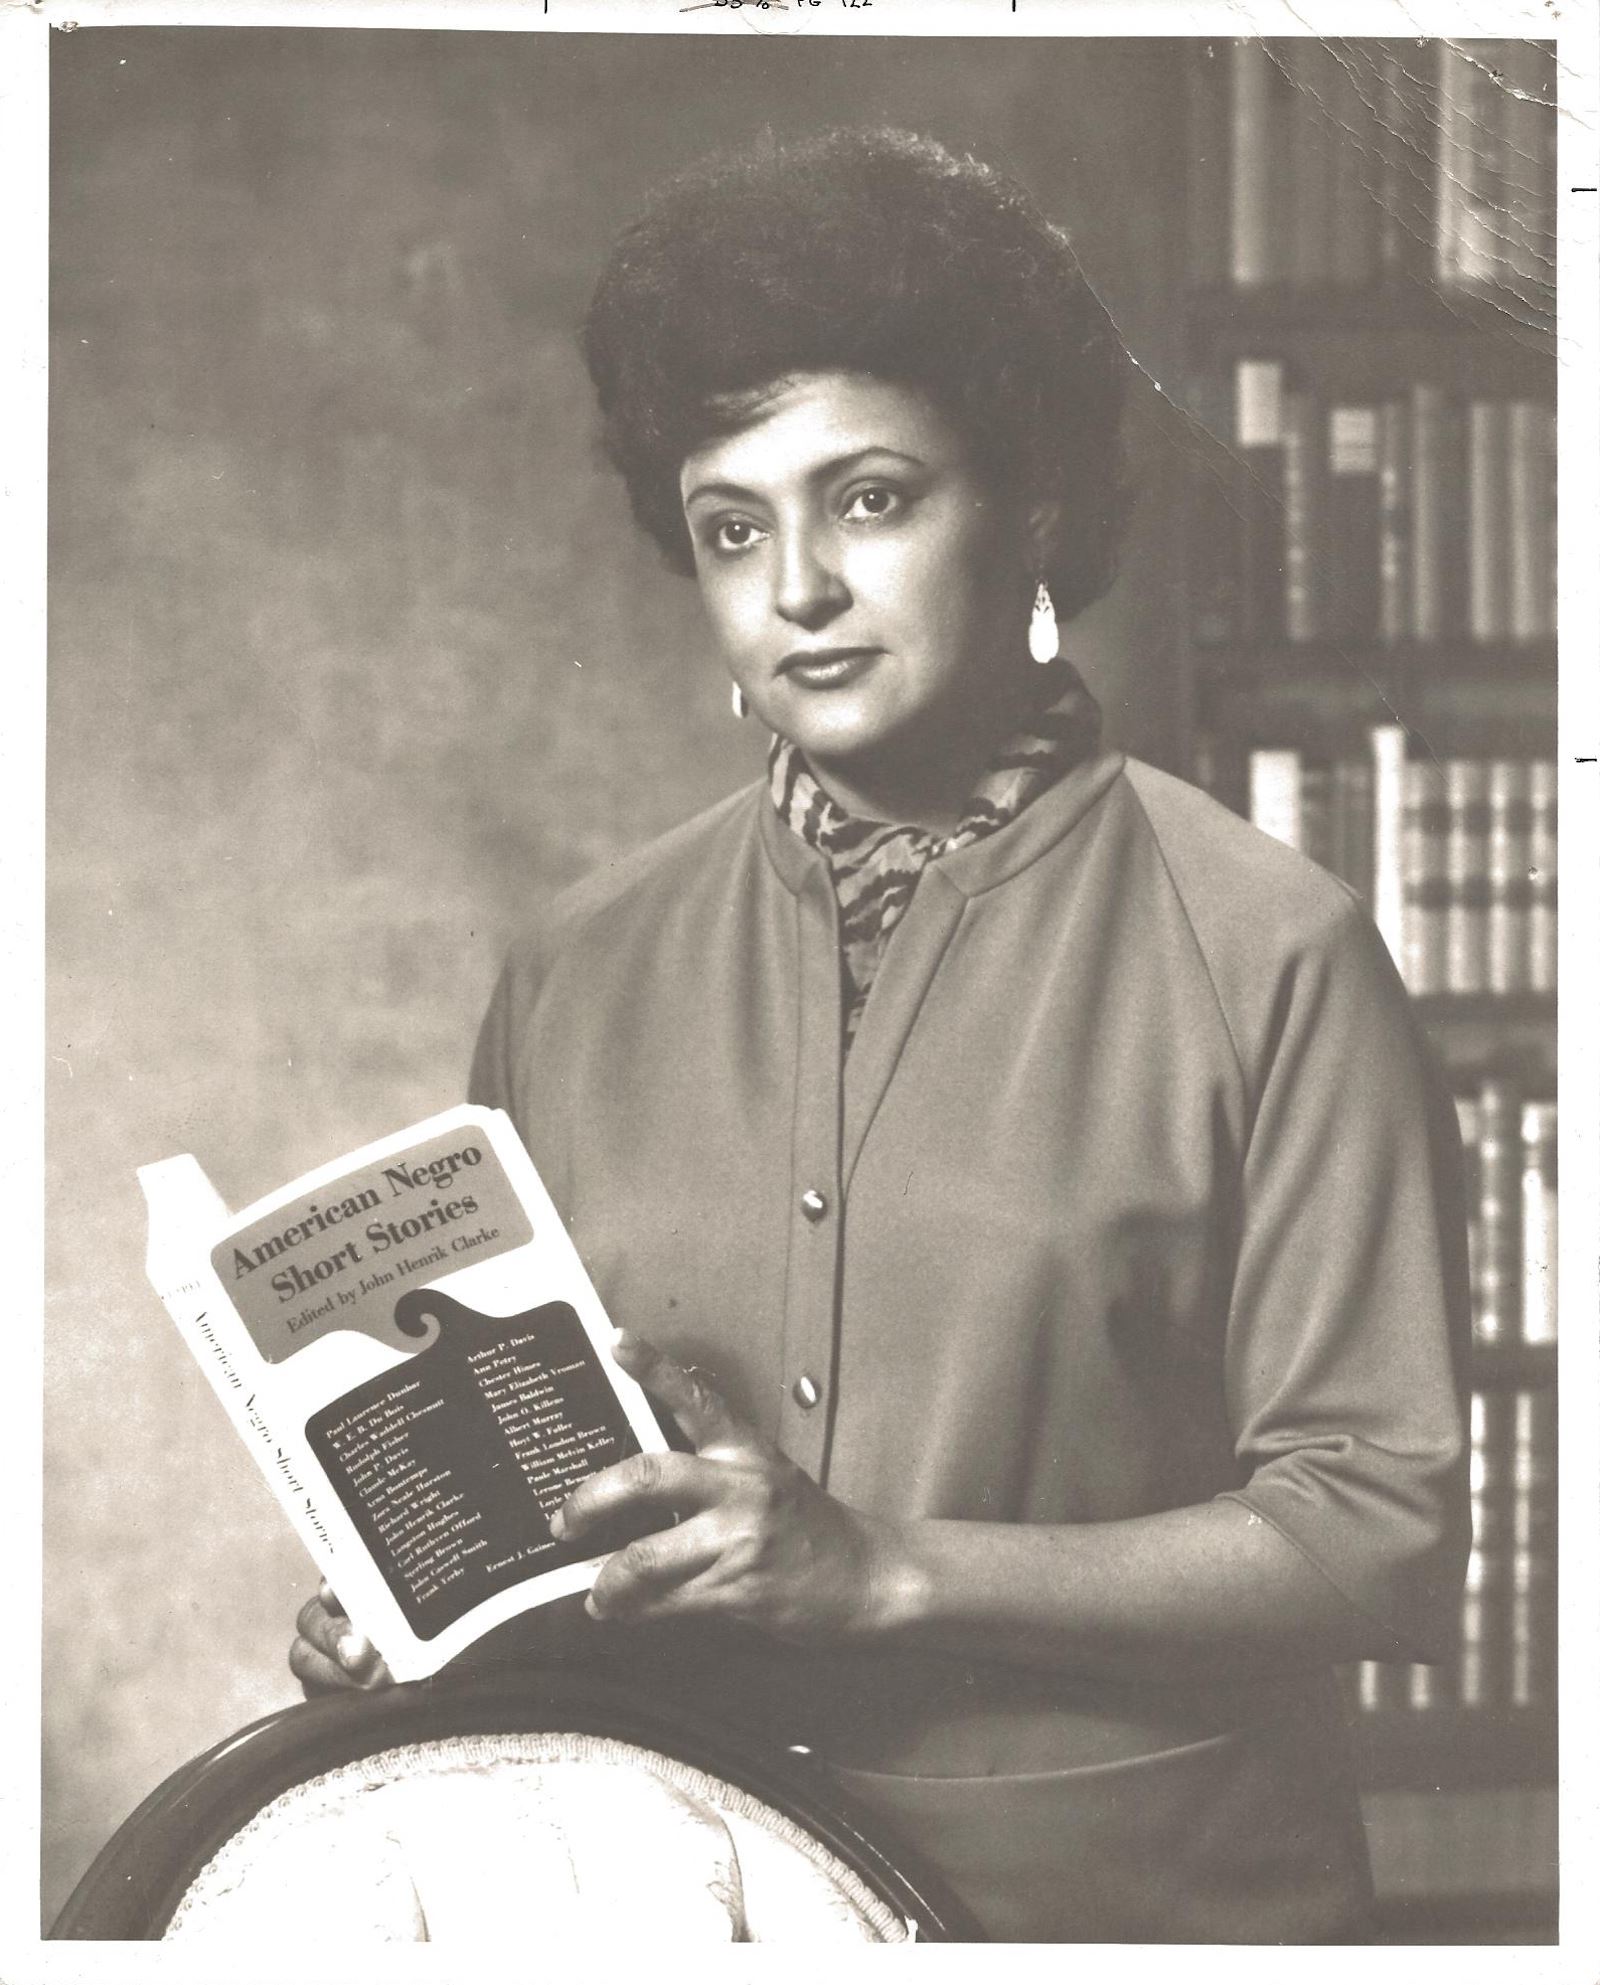 A black-and-white portrait of a woman holding a book titled 